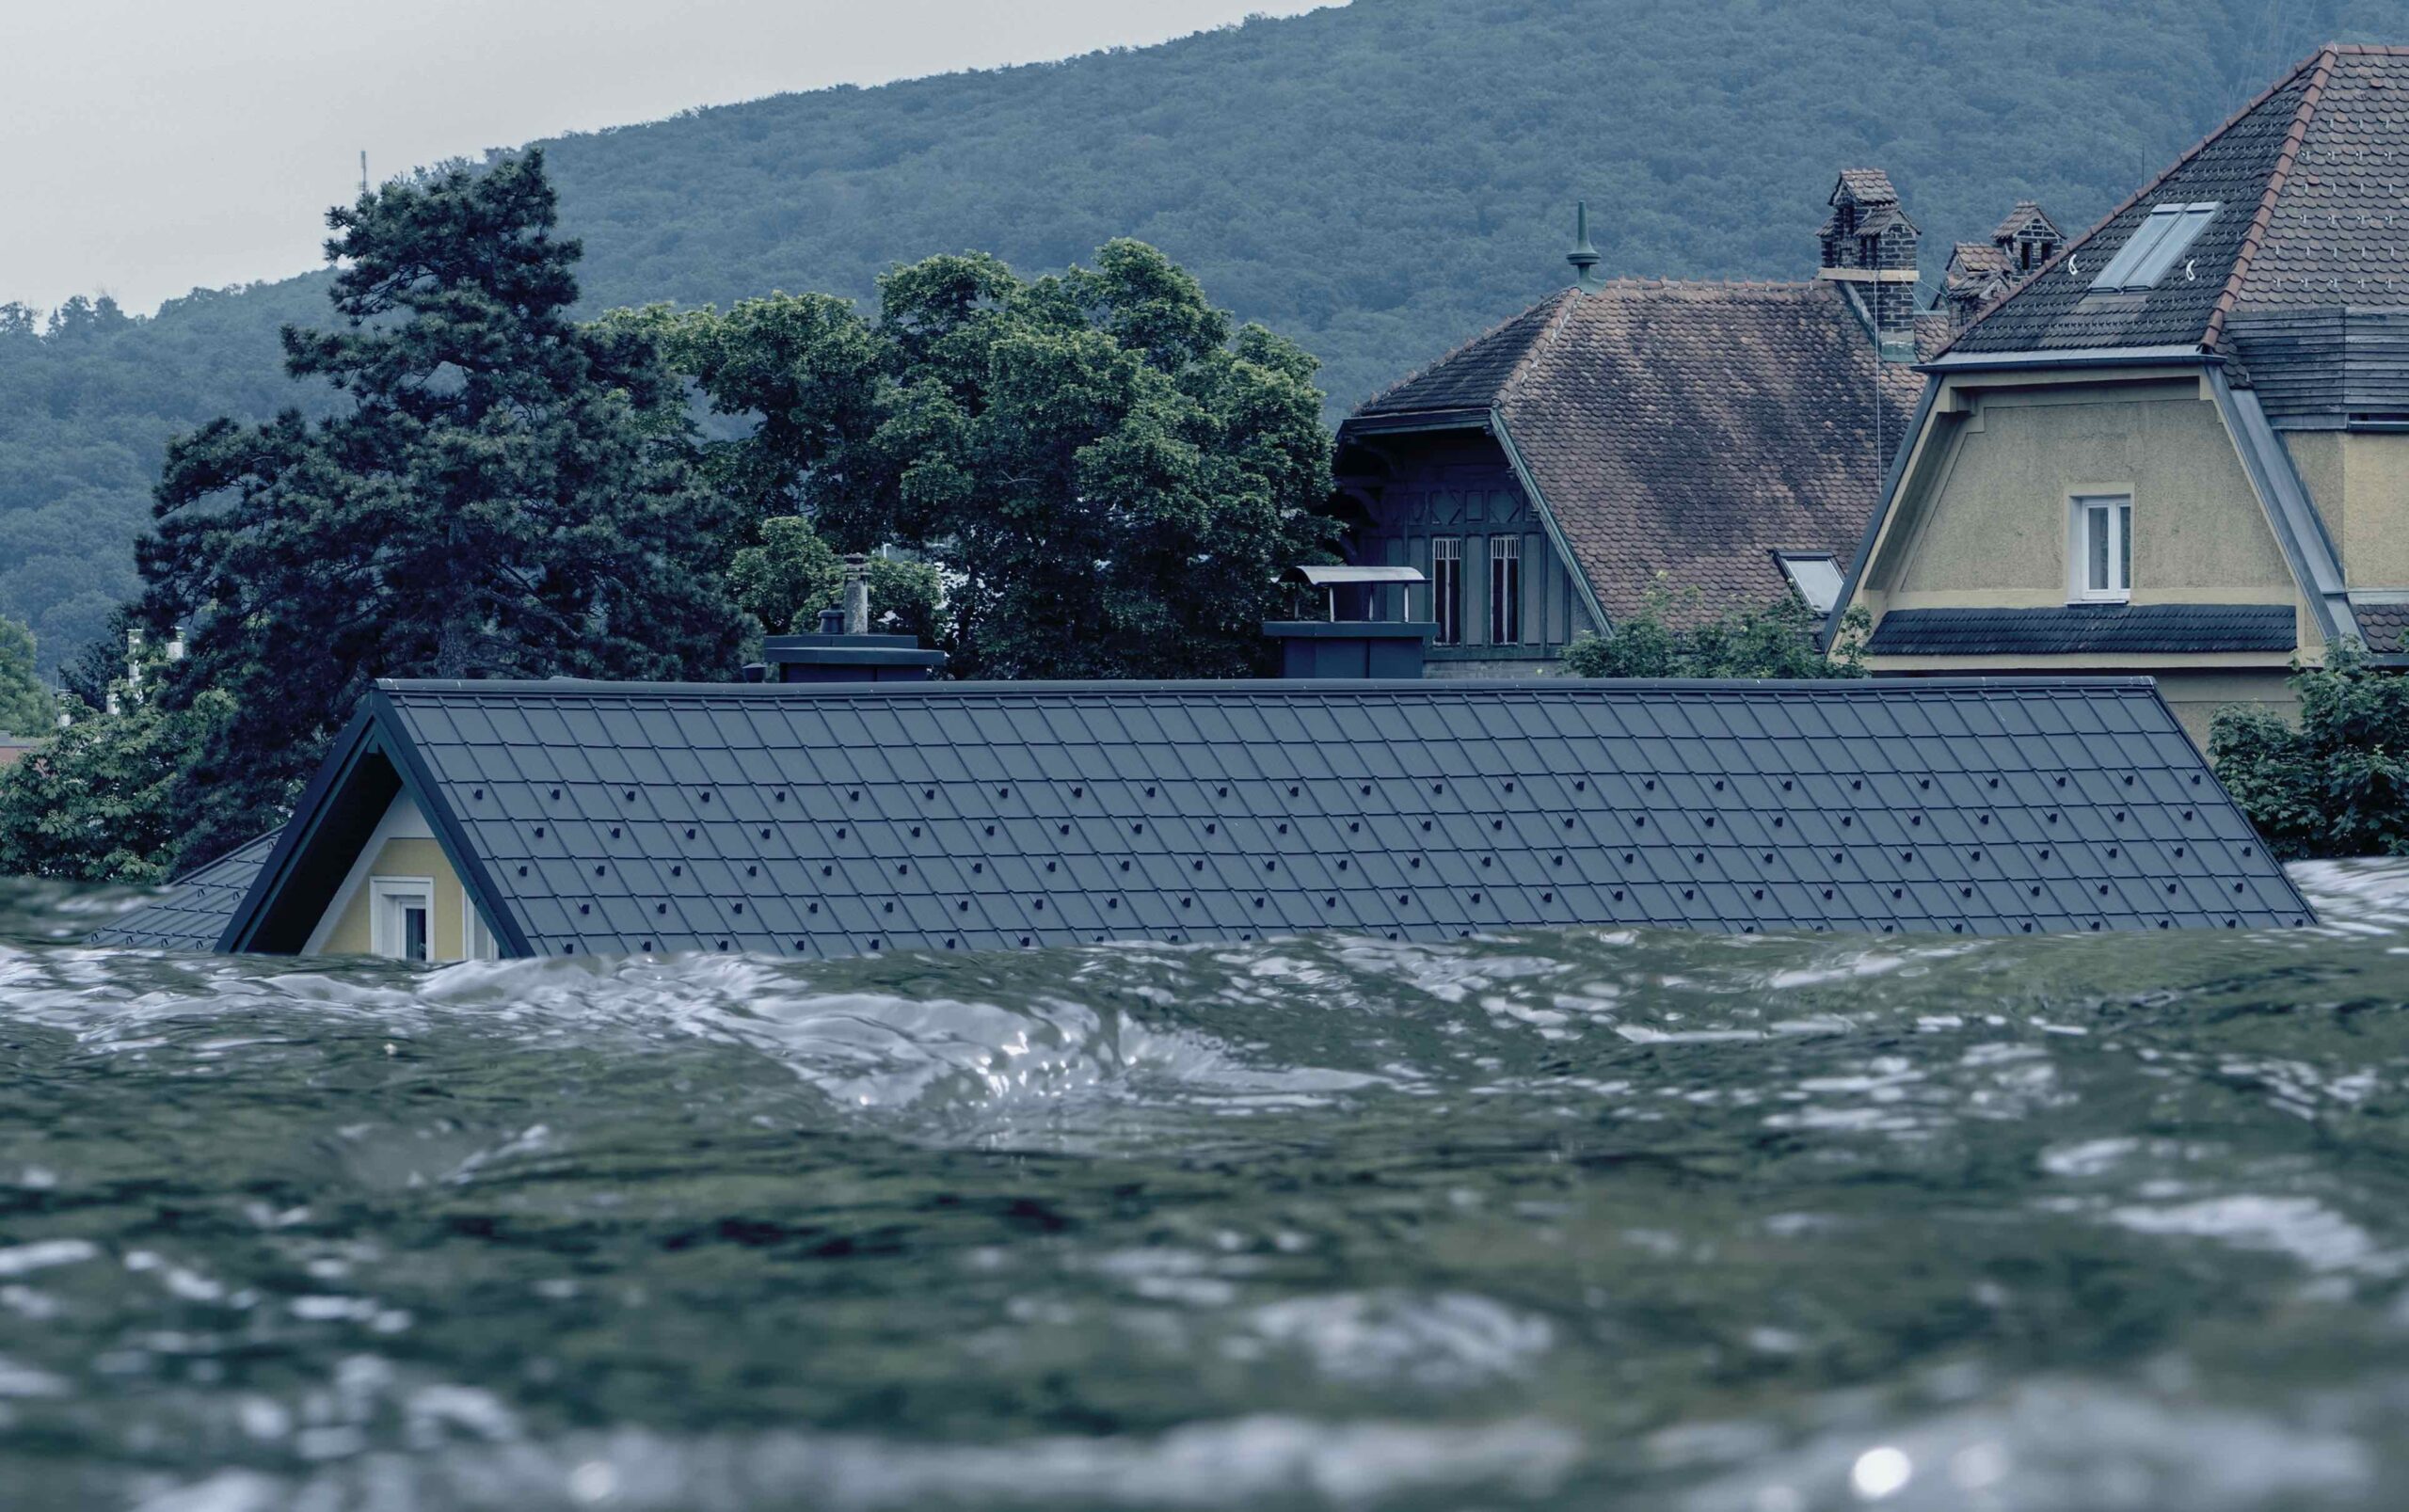 Floodwaters close to the top of the roof of a house